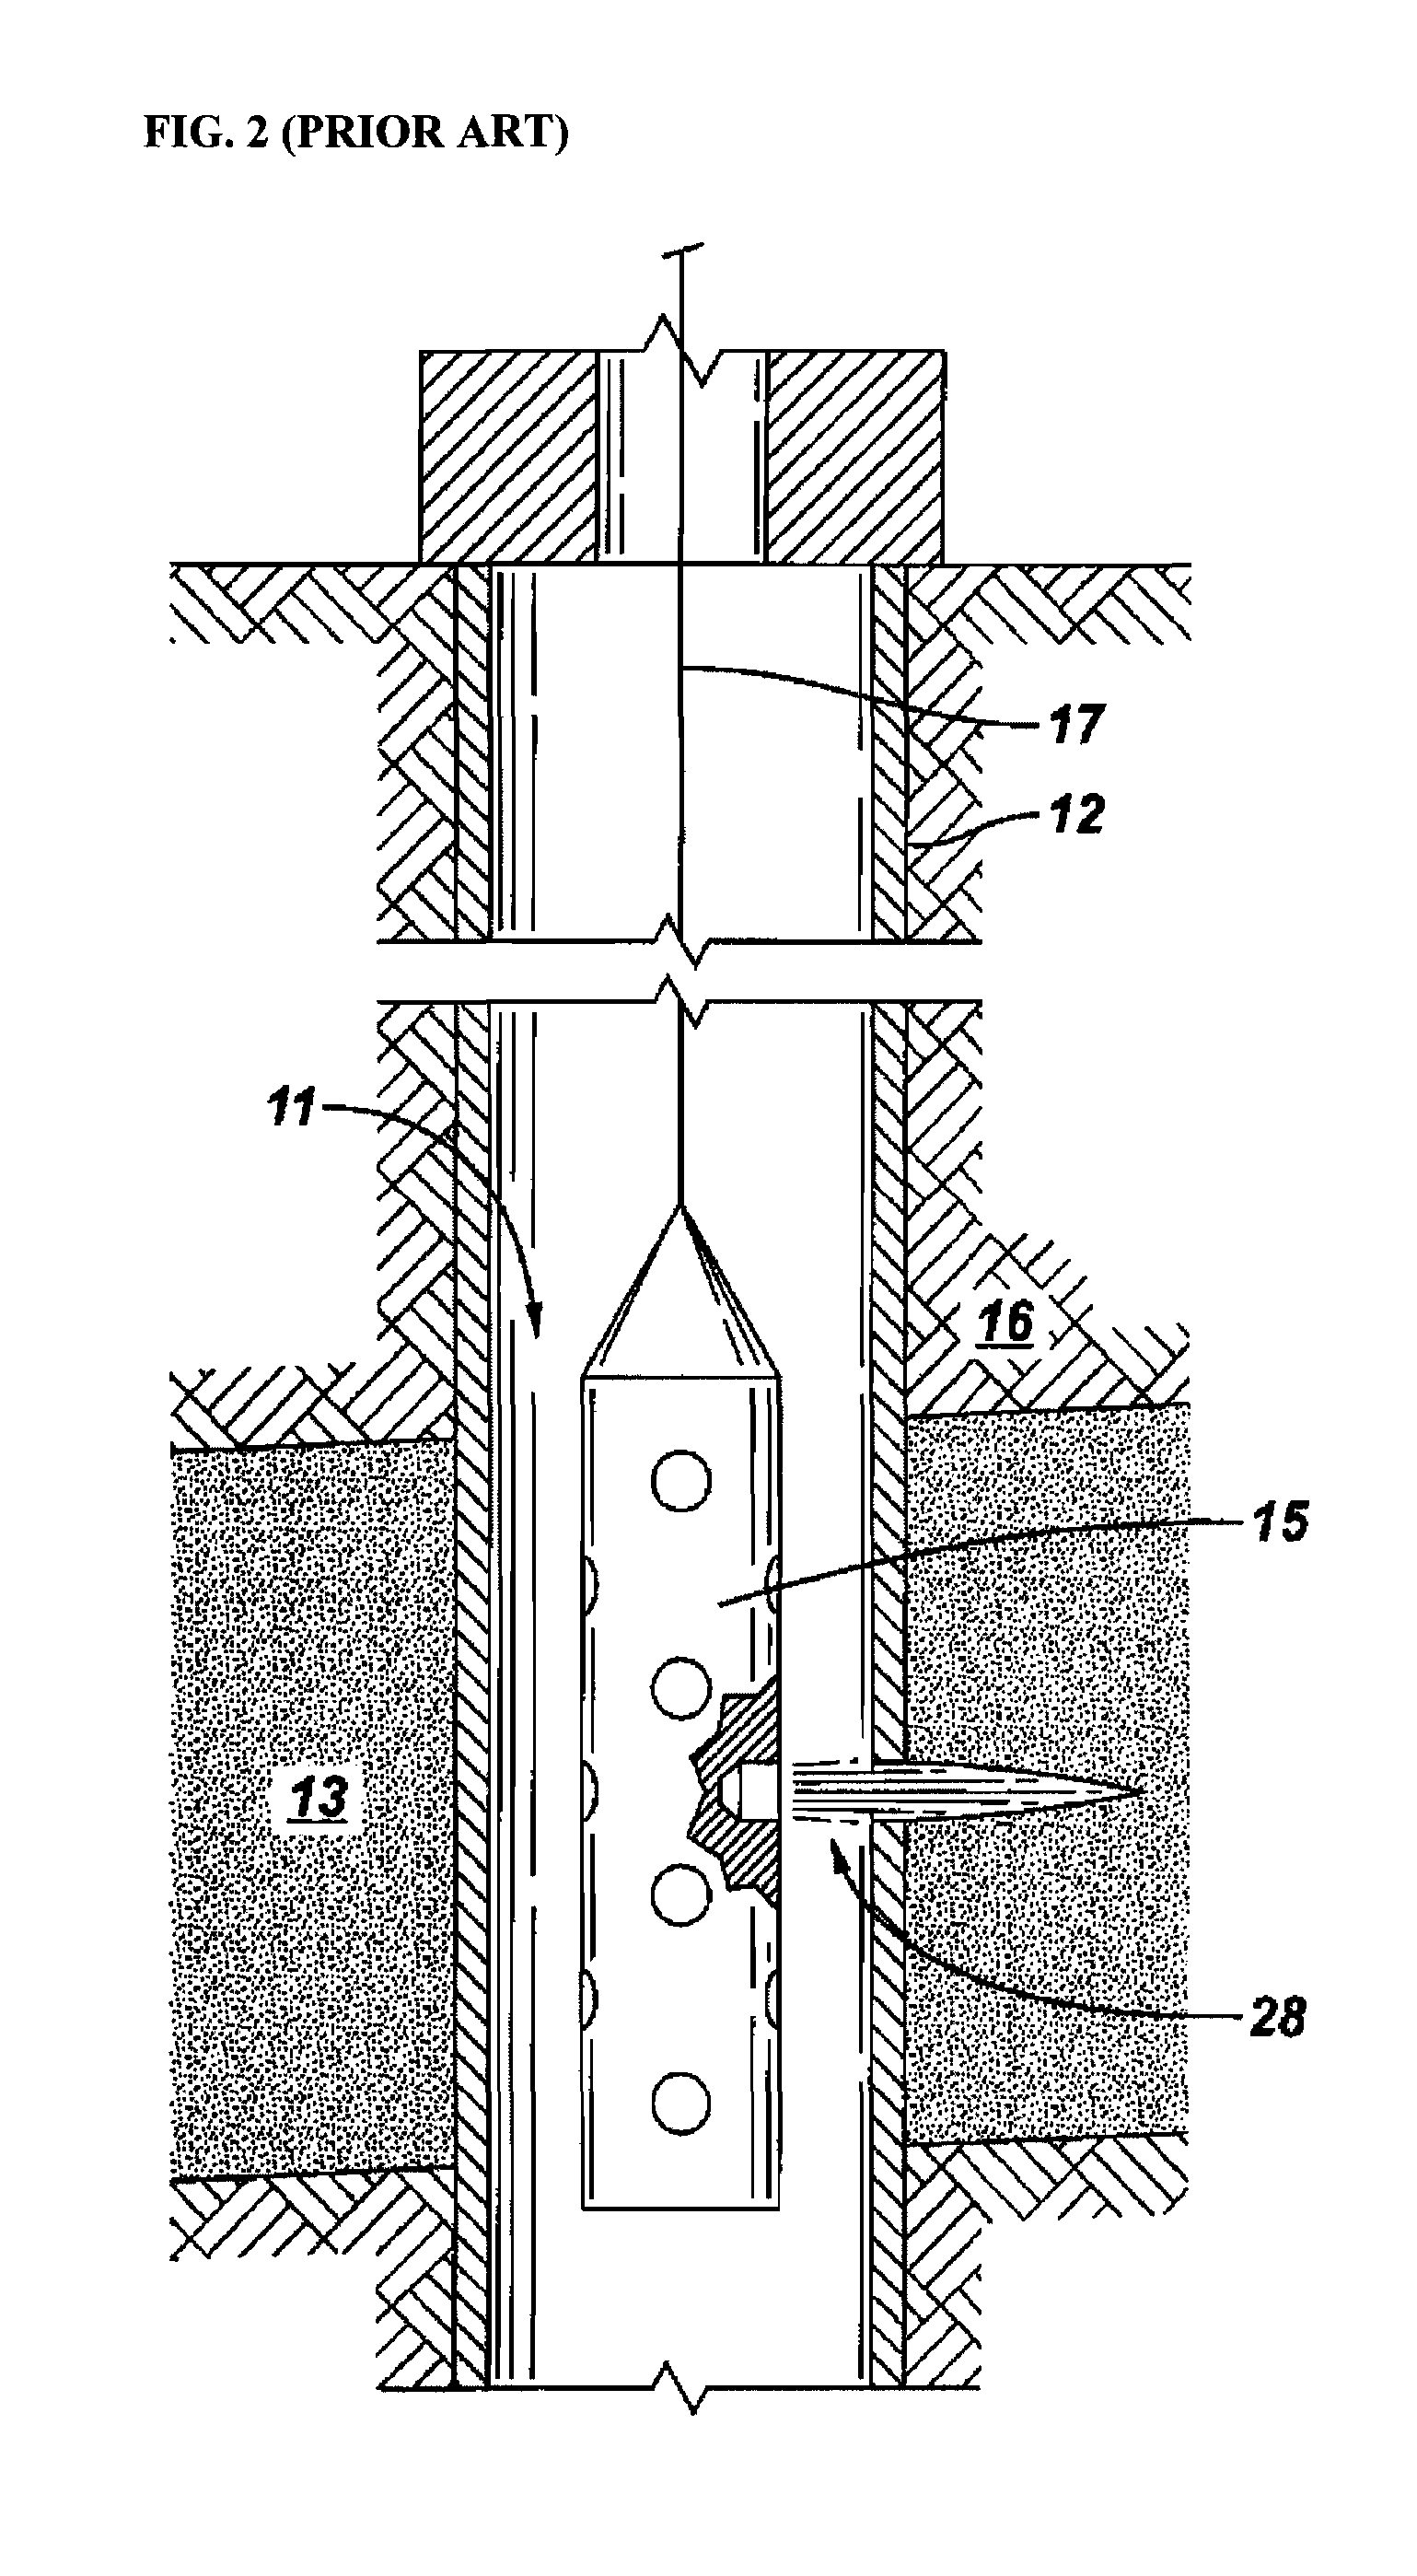 Perforating devices utilizing thermite charges in well perforation and downhole fracing